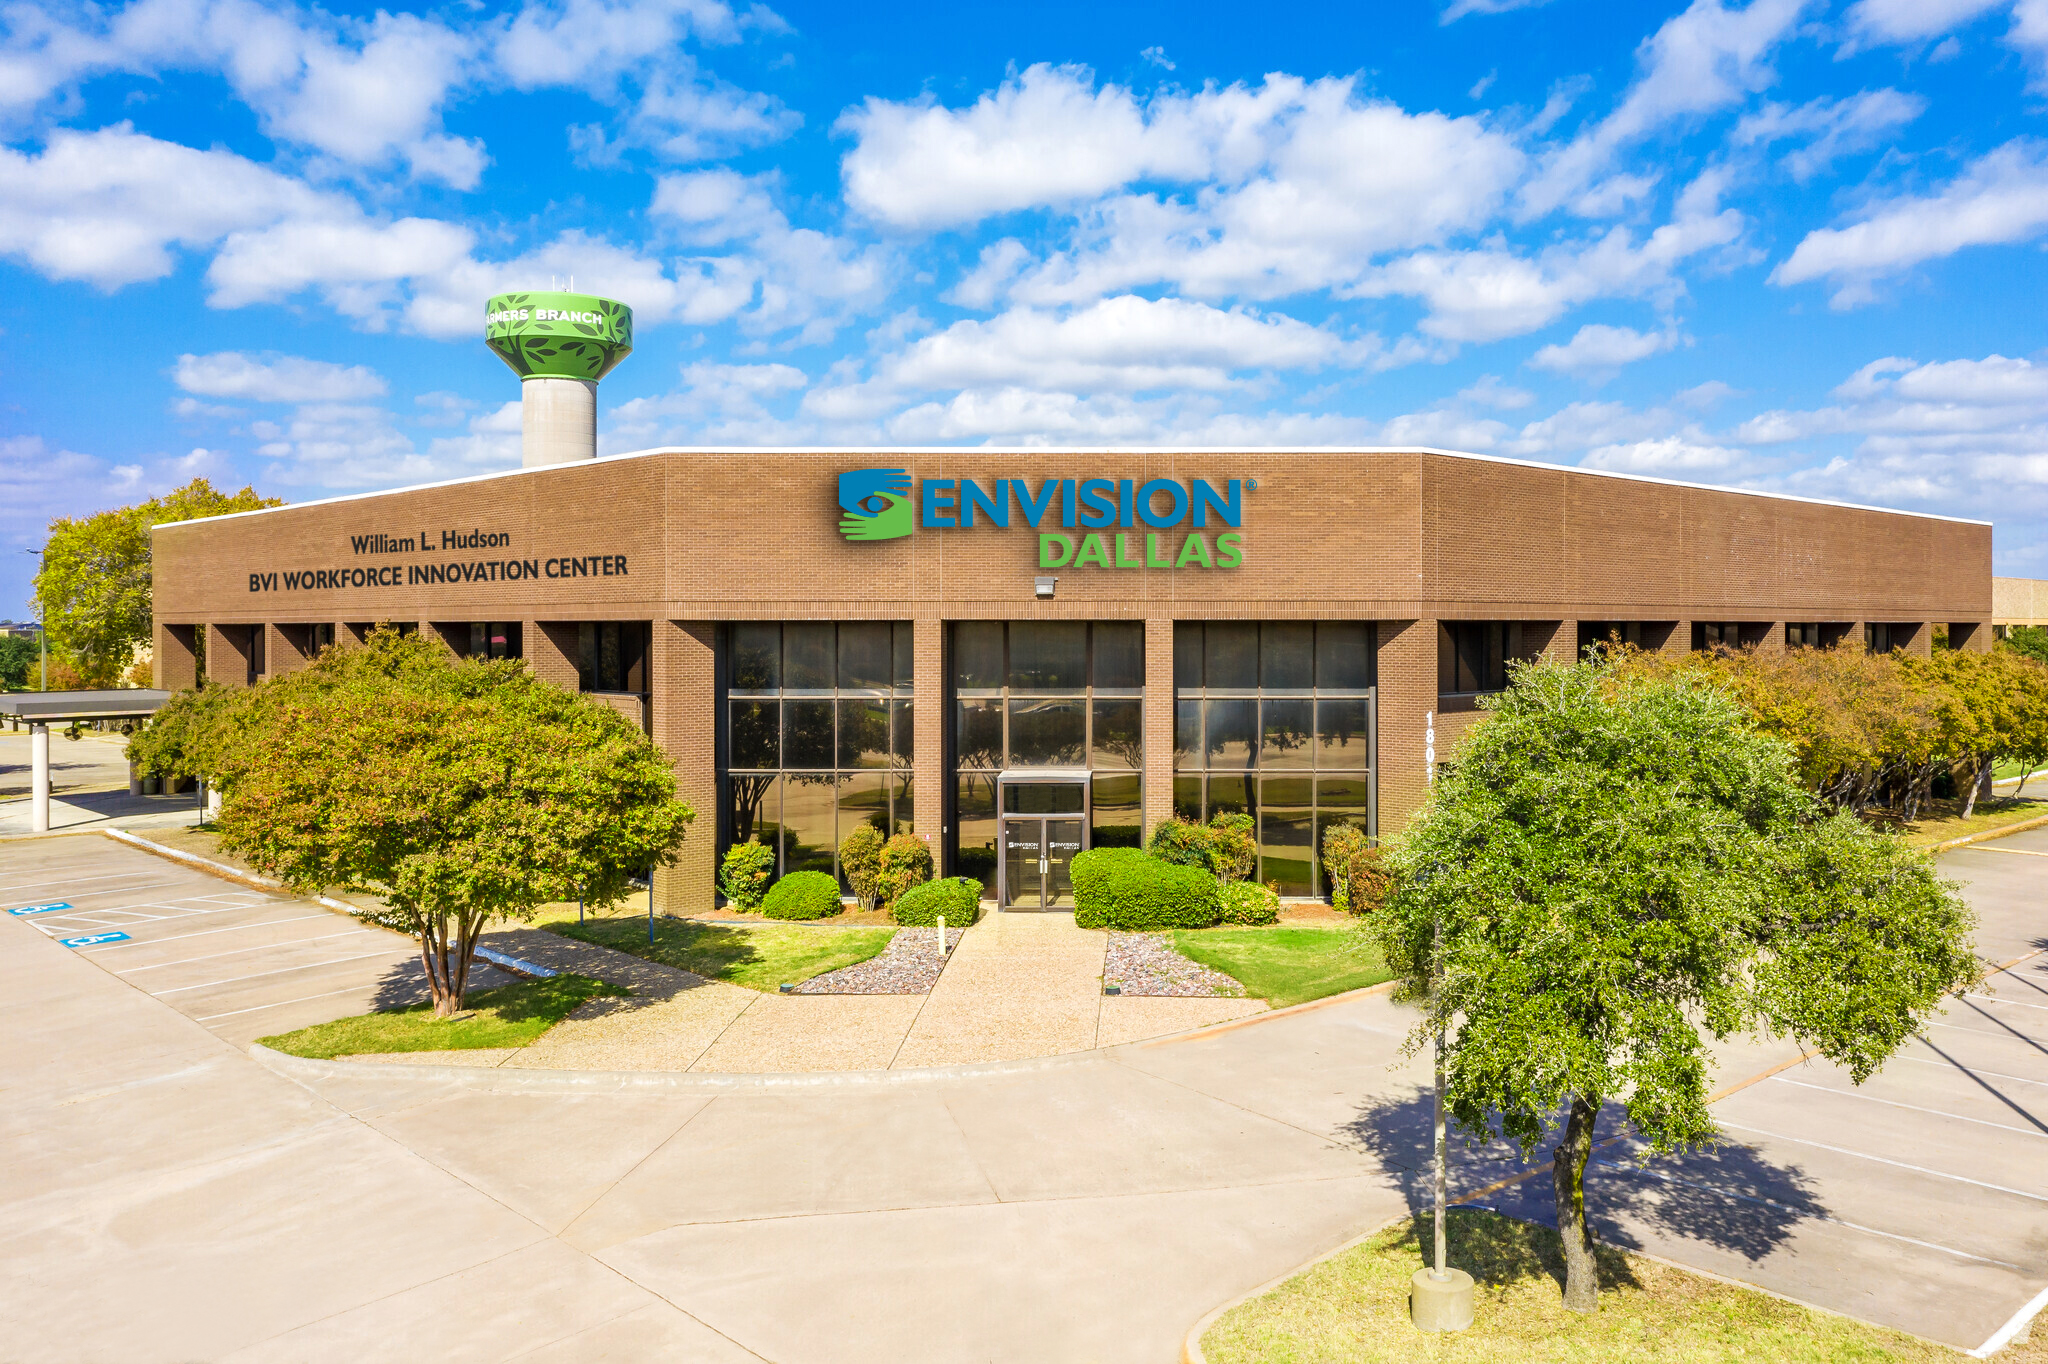 Rendering of the new Envision Dallas building in Farmers Branch with a sign on the of the building that says William L. Hudson BVI Workforce Innovation Center